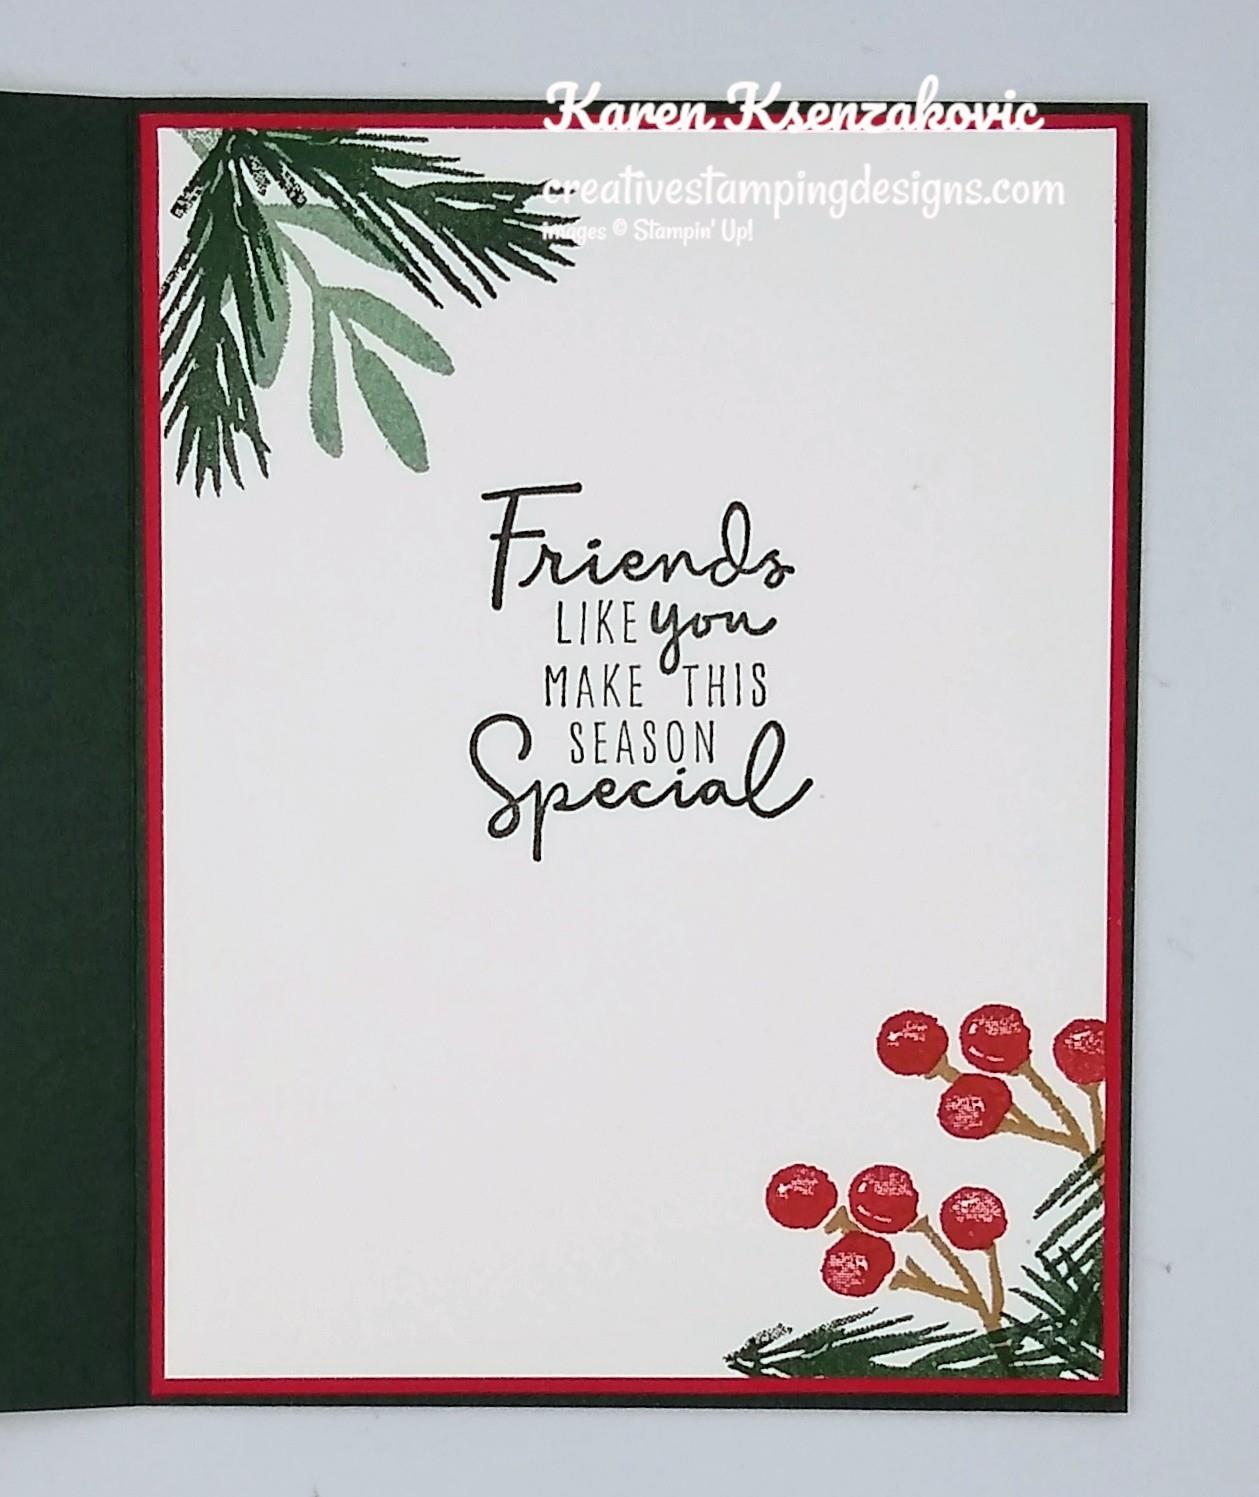 Stampin UP Top Note Shapes made using Christmas Print Cardstock for Crafts Cards Christmas Projects Labels